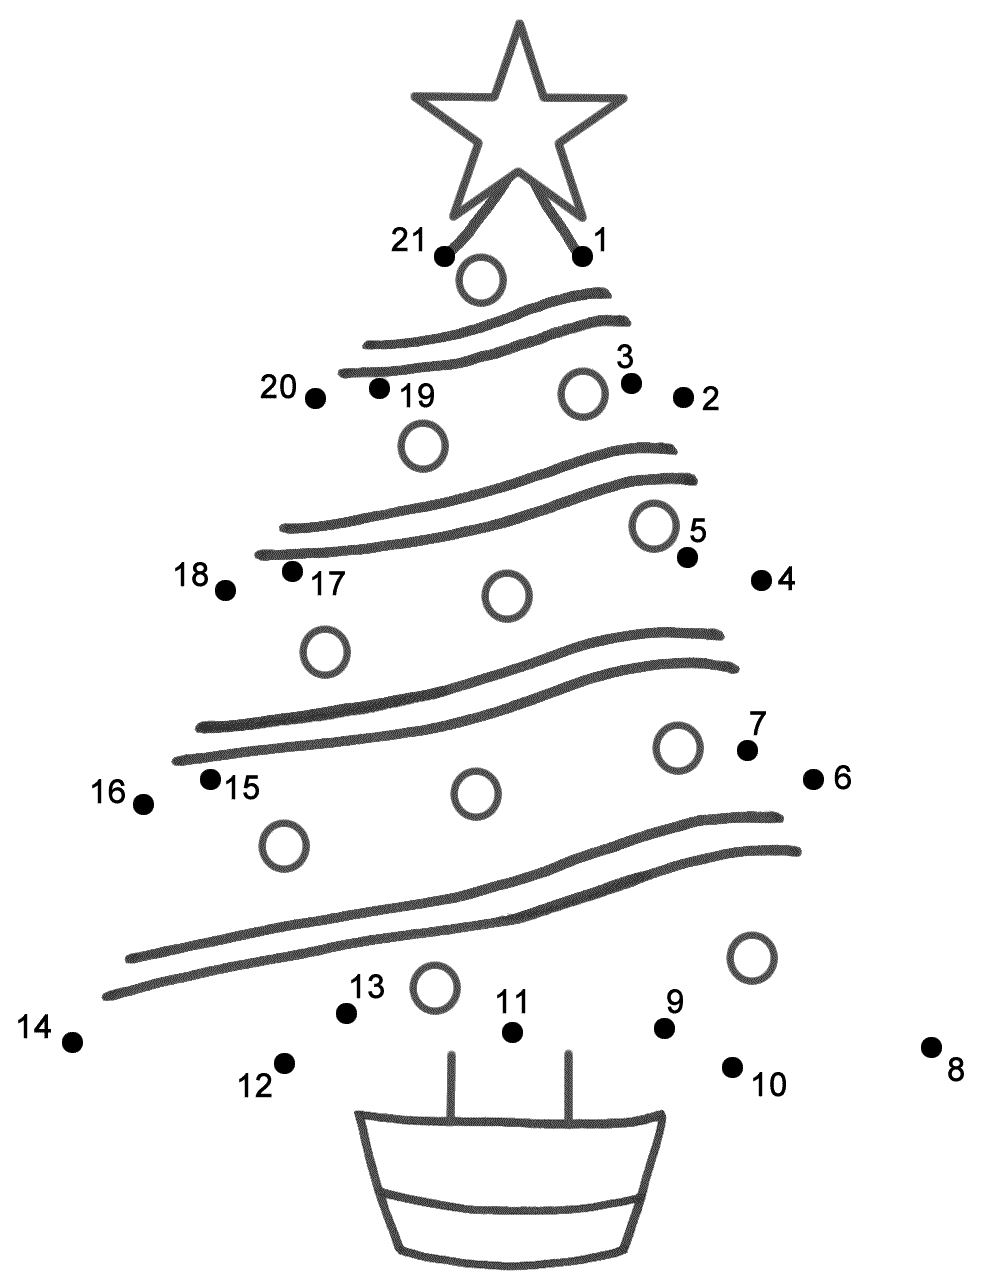 Christmas Tree - Connect the Dots, count by 1